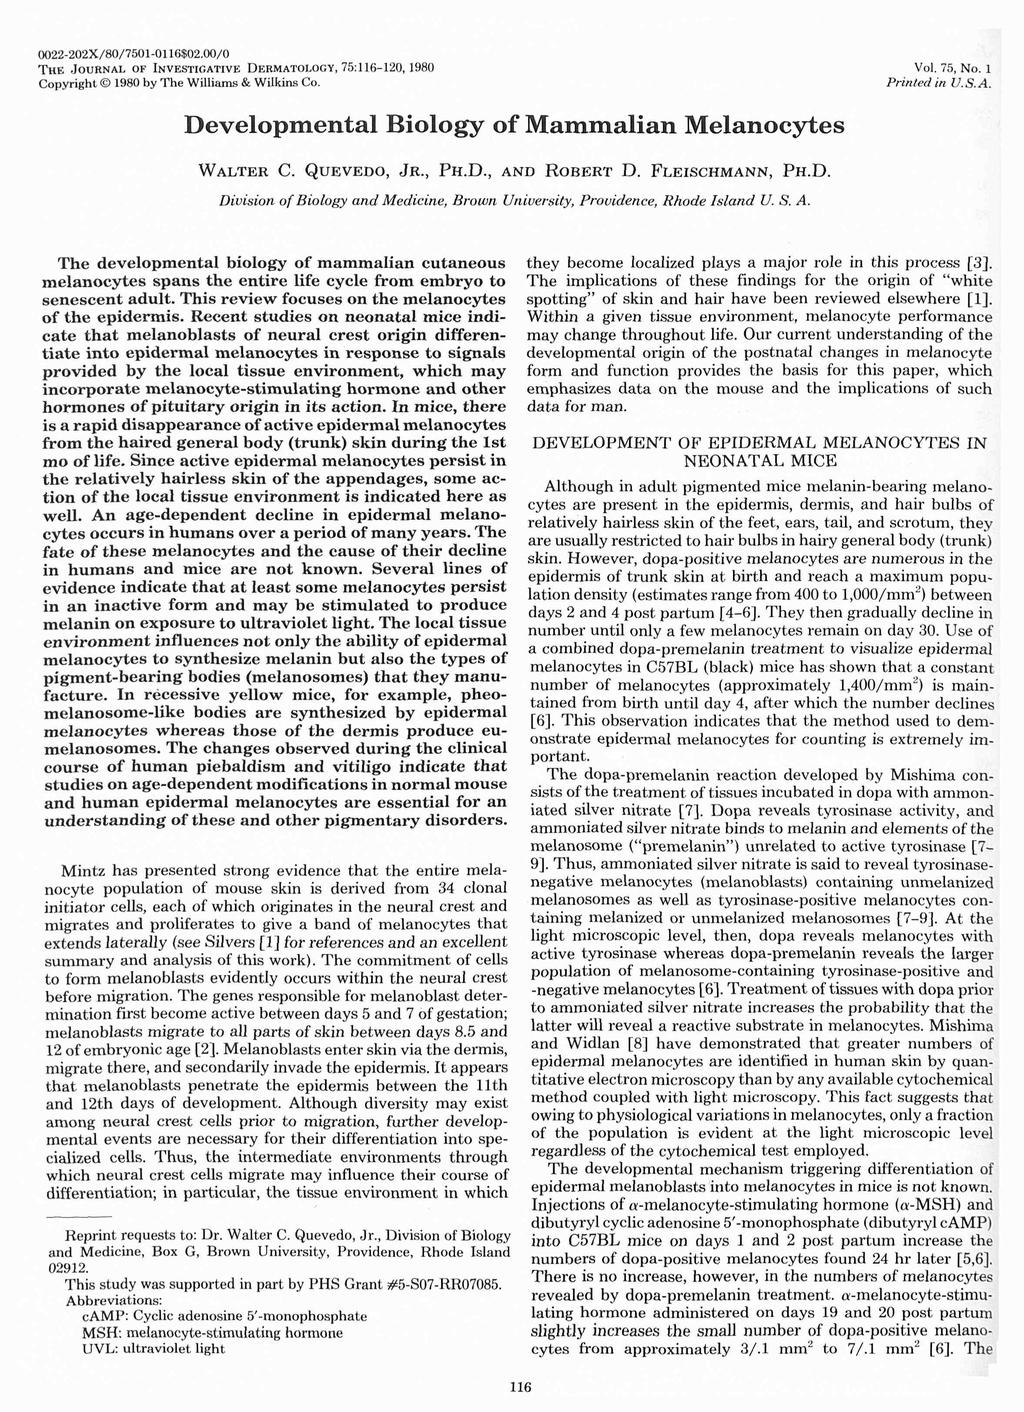 0022-202X/ 80/7501-0116$02.00/0 THE JouRNAL OF INVESTIGATIVE DERMATOLOGY, 75:116-120, 1980 Copyright 1980 by The Williams & Wilkins Co. Vol. 75, No.1 Printed in U.S. A.